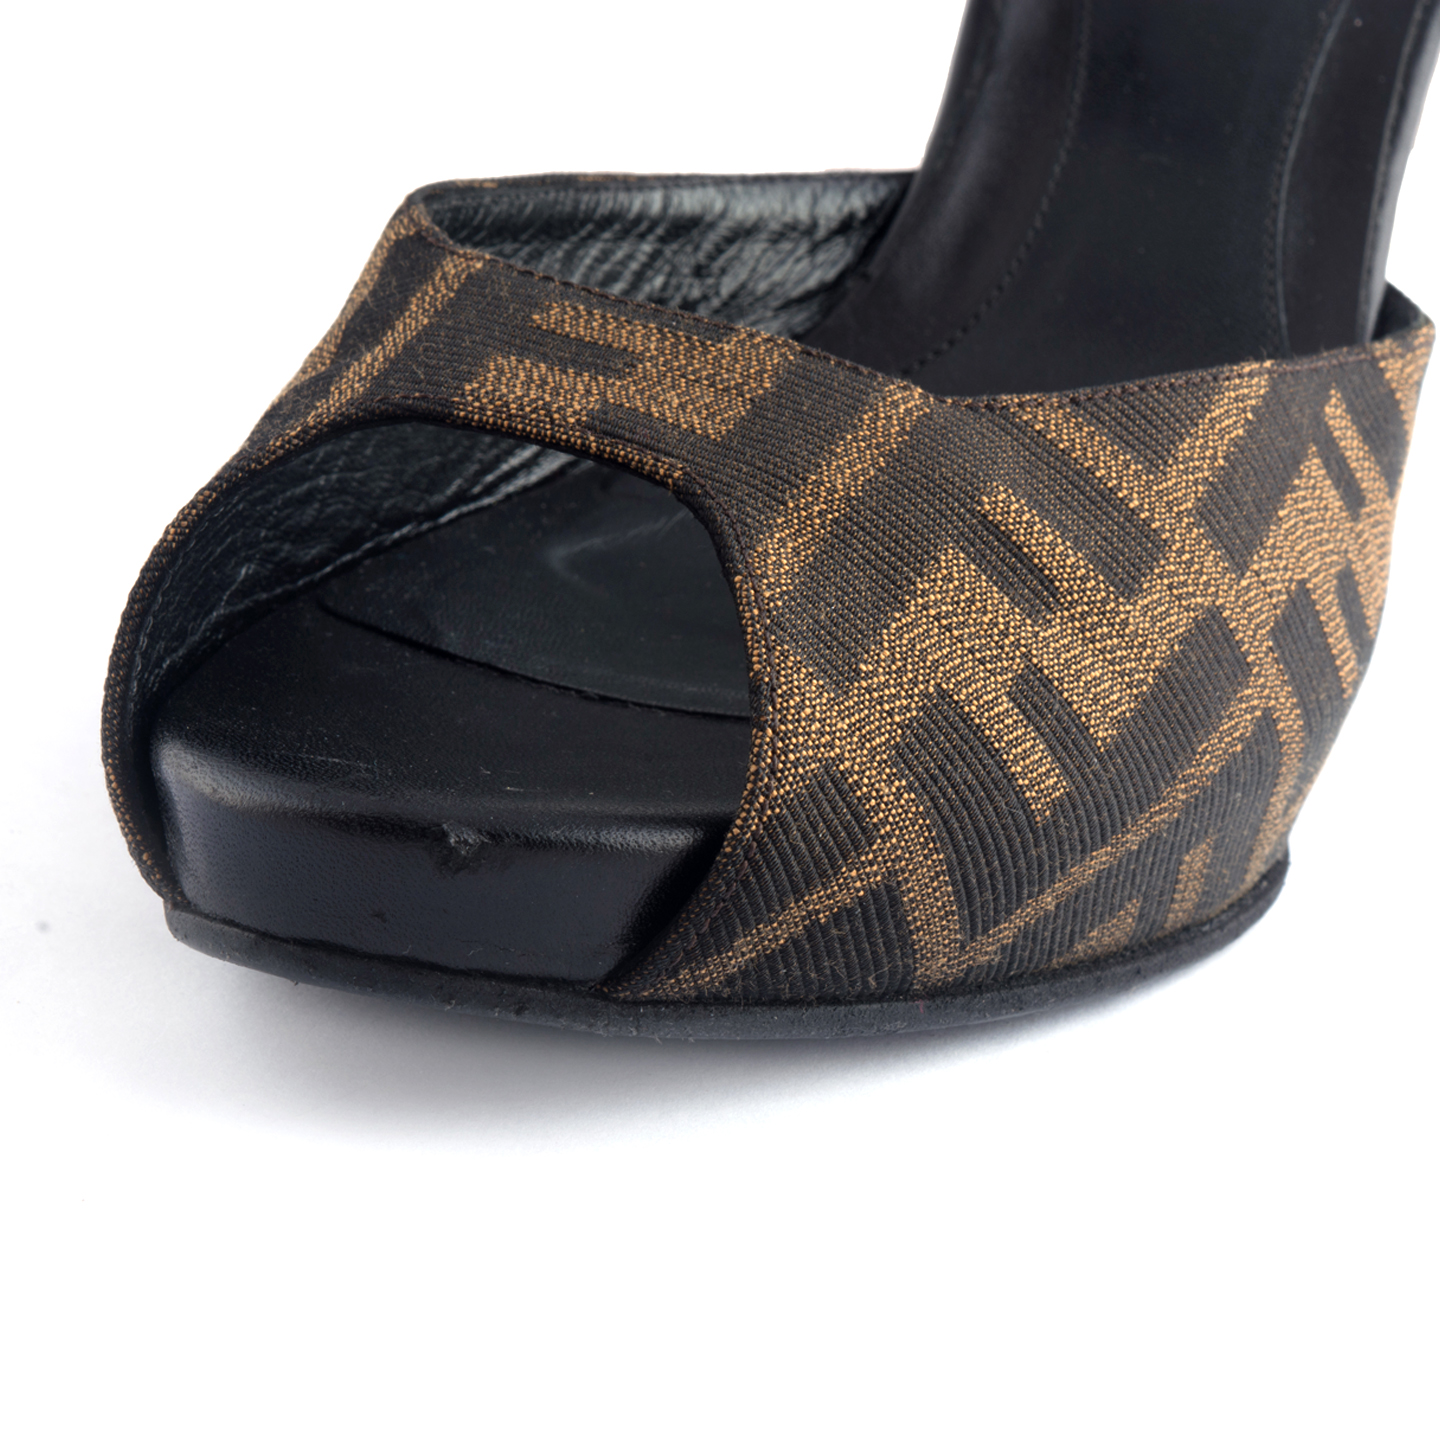 Fendi Zucca Canvas Slingback Wedges Size 41 - LabelCentric